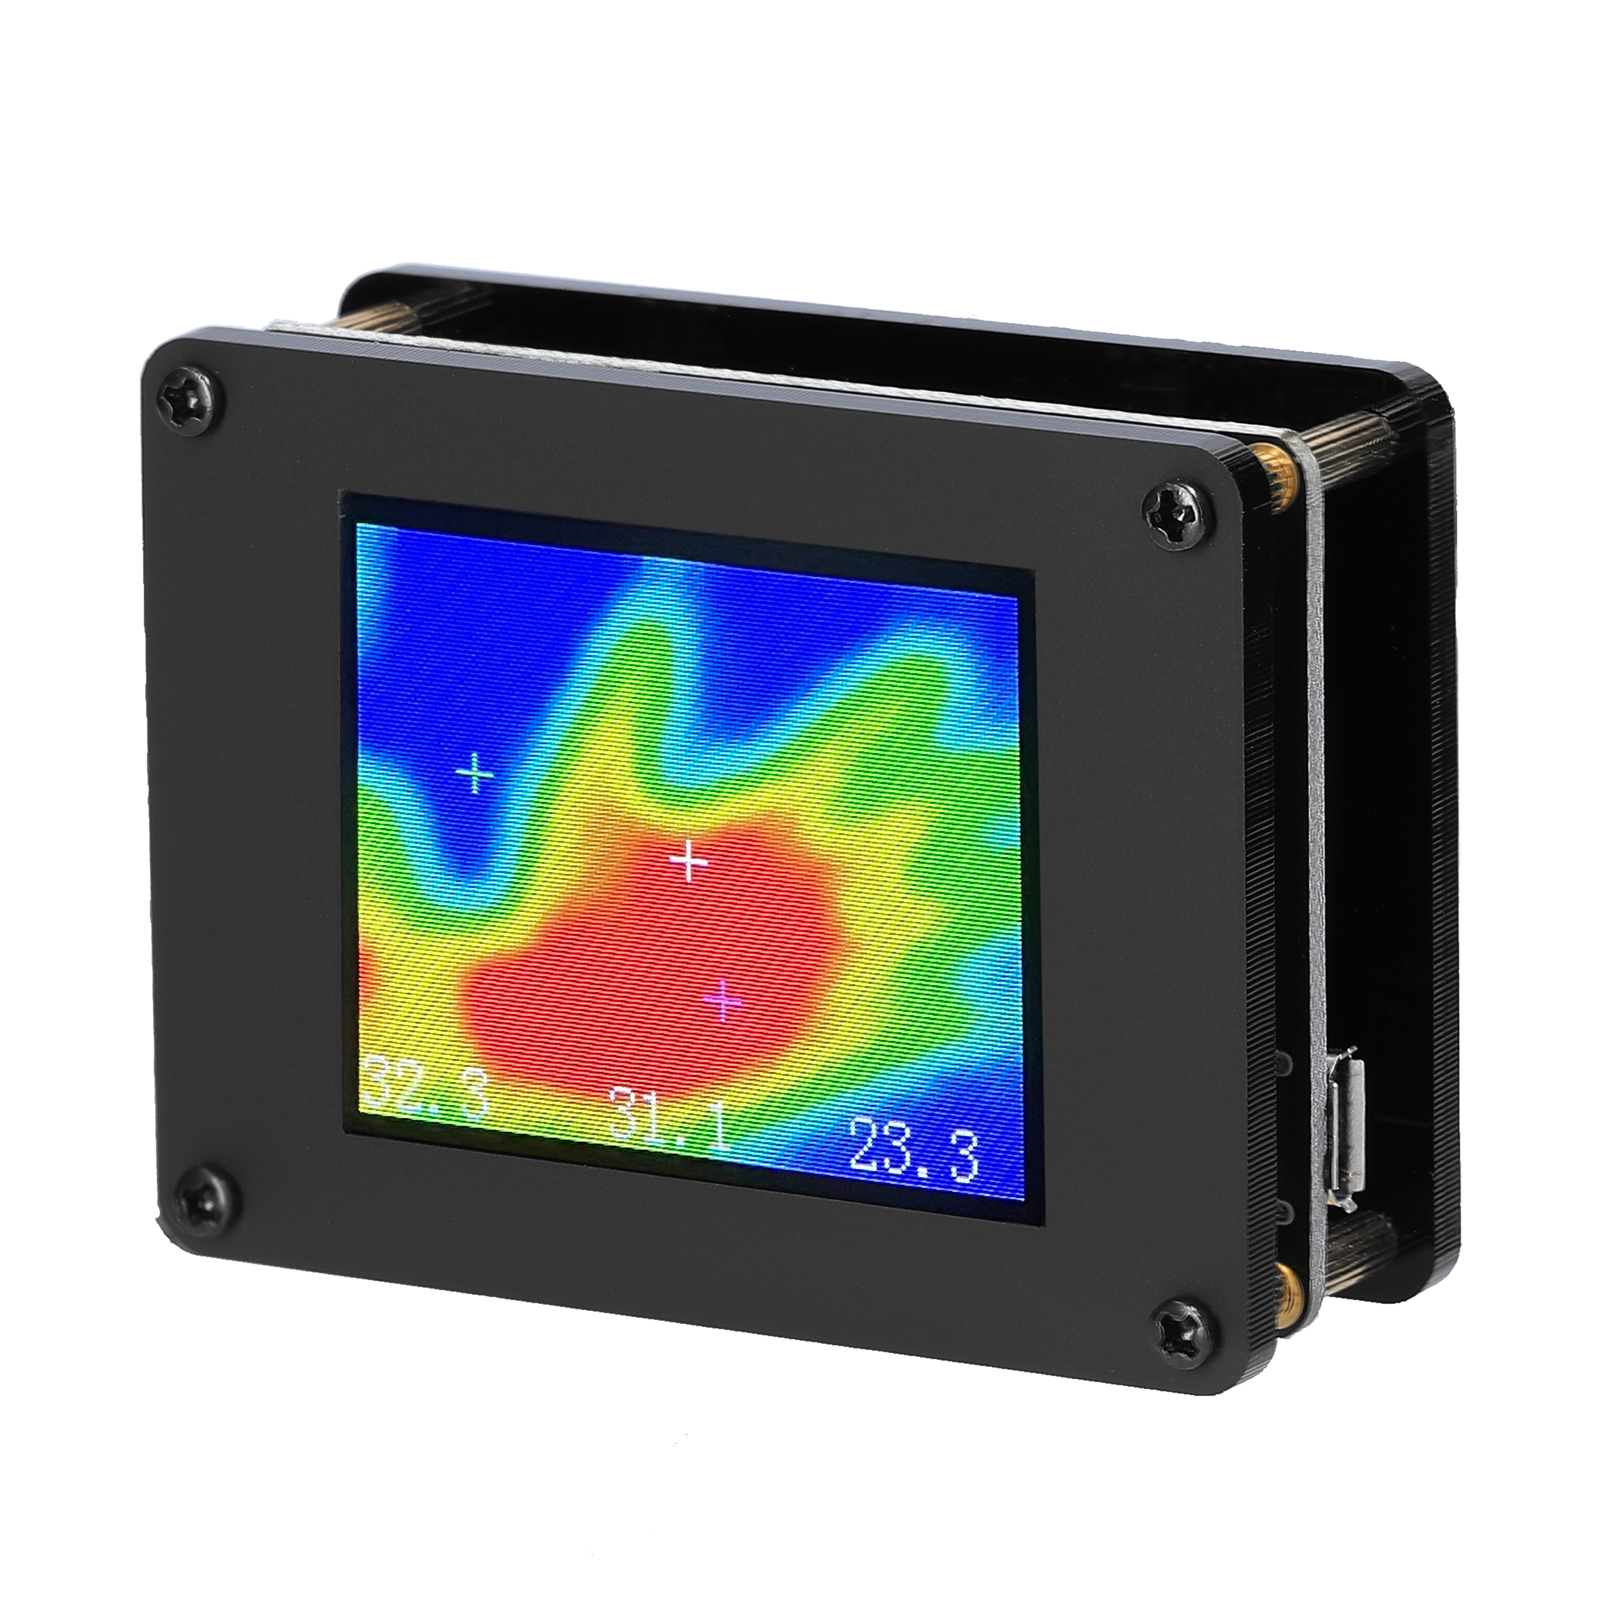 MLX90640-Portable-3224--40300-Infrared-Thermal-Imager-with-18-Inch-TFT-Screen-Infrared-Temperature-S-1898503-6